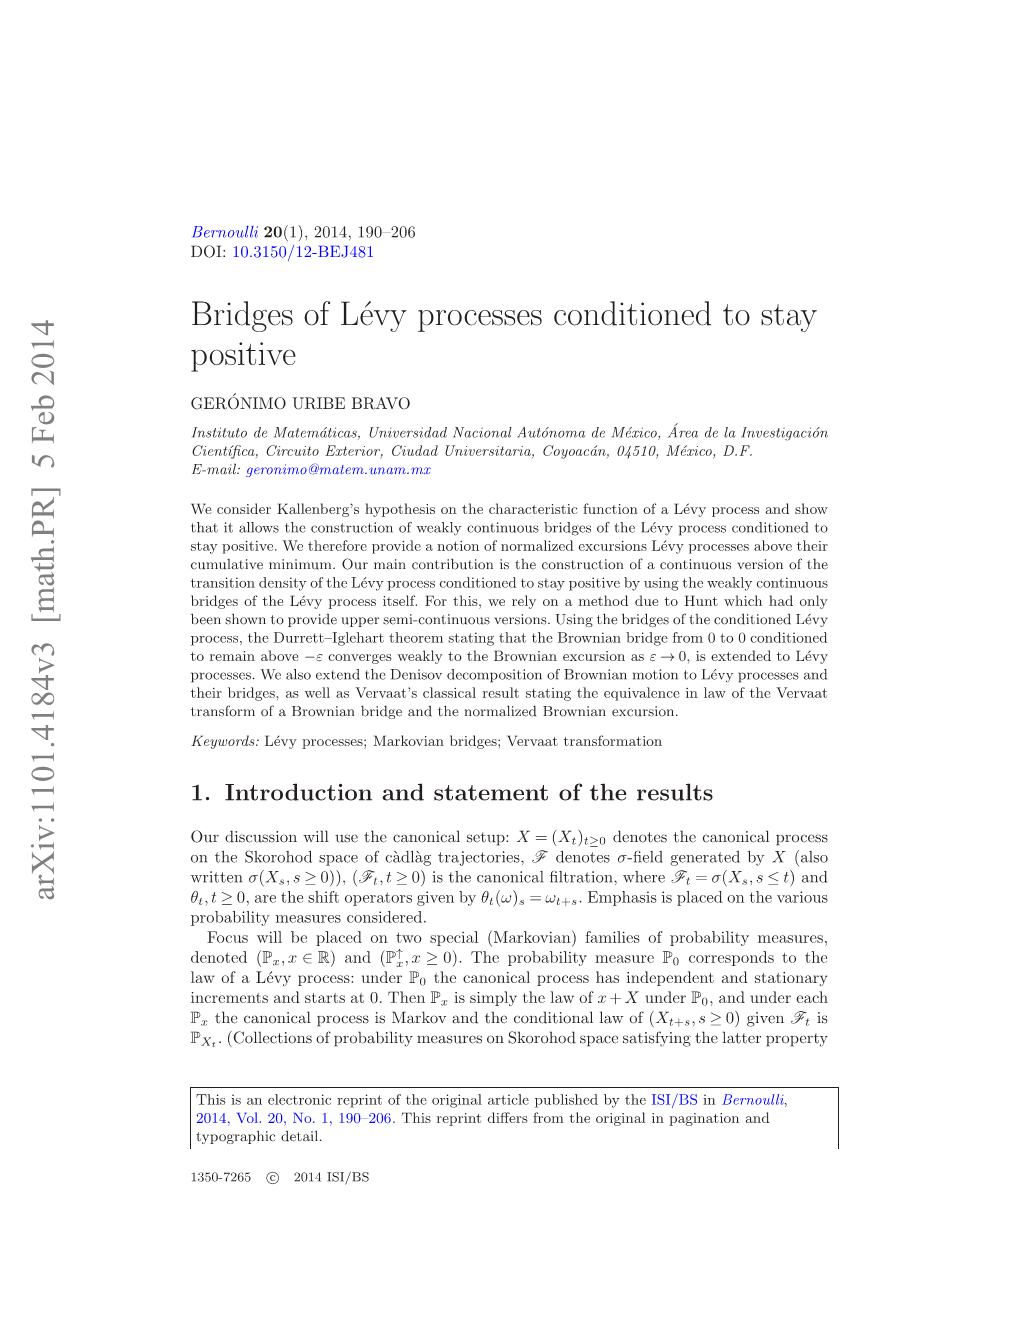 Bridges of Lévy Processes Conditioned to Stay Positive